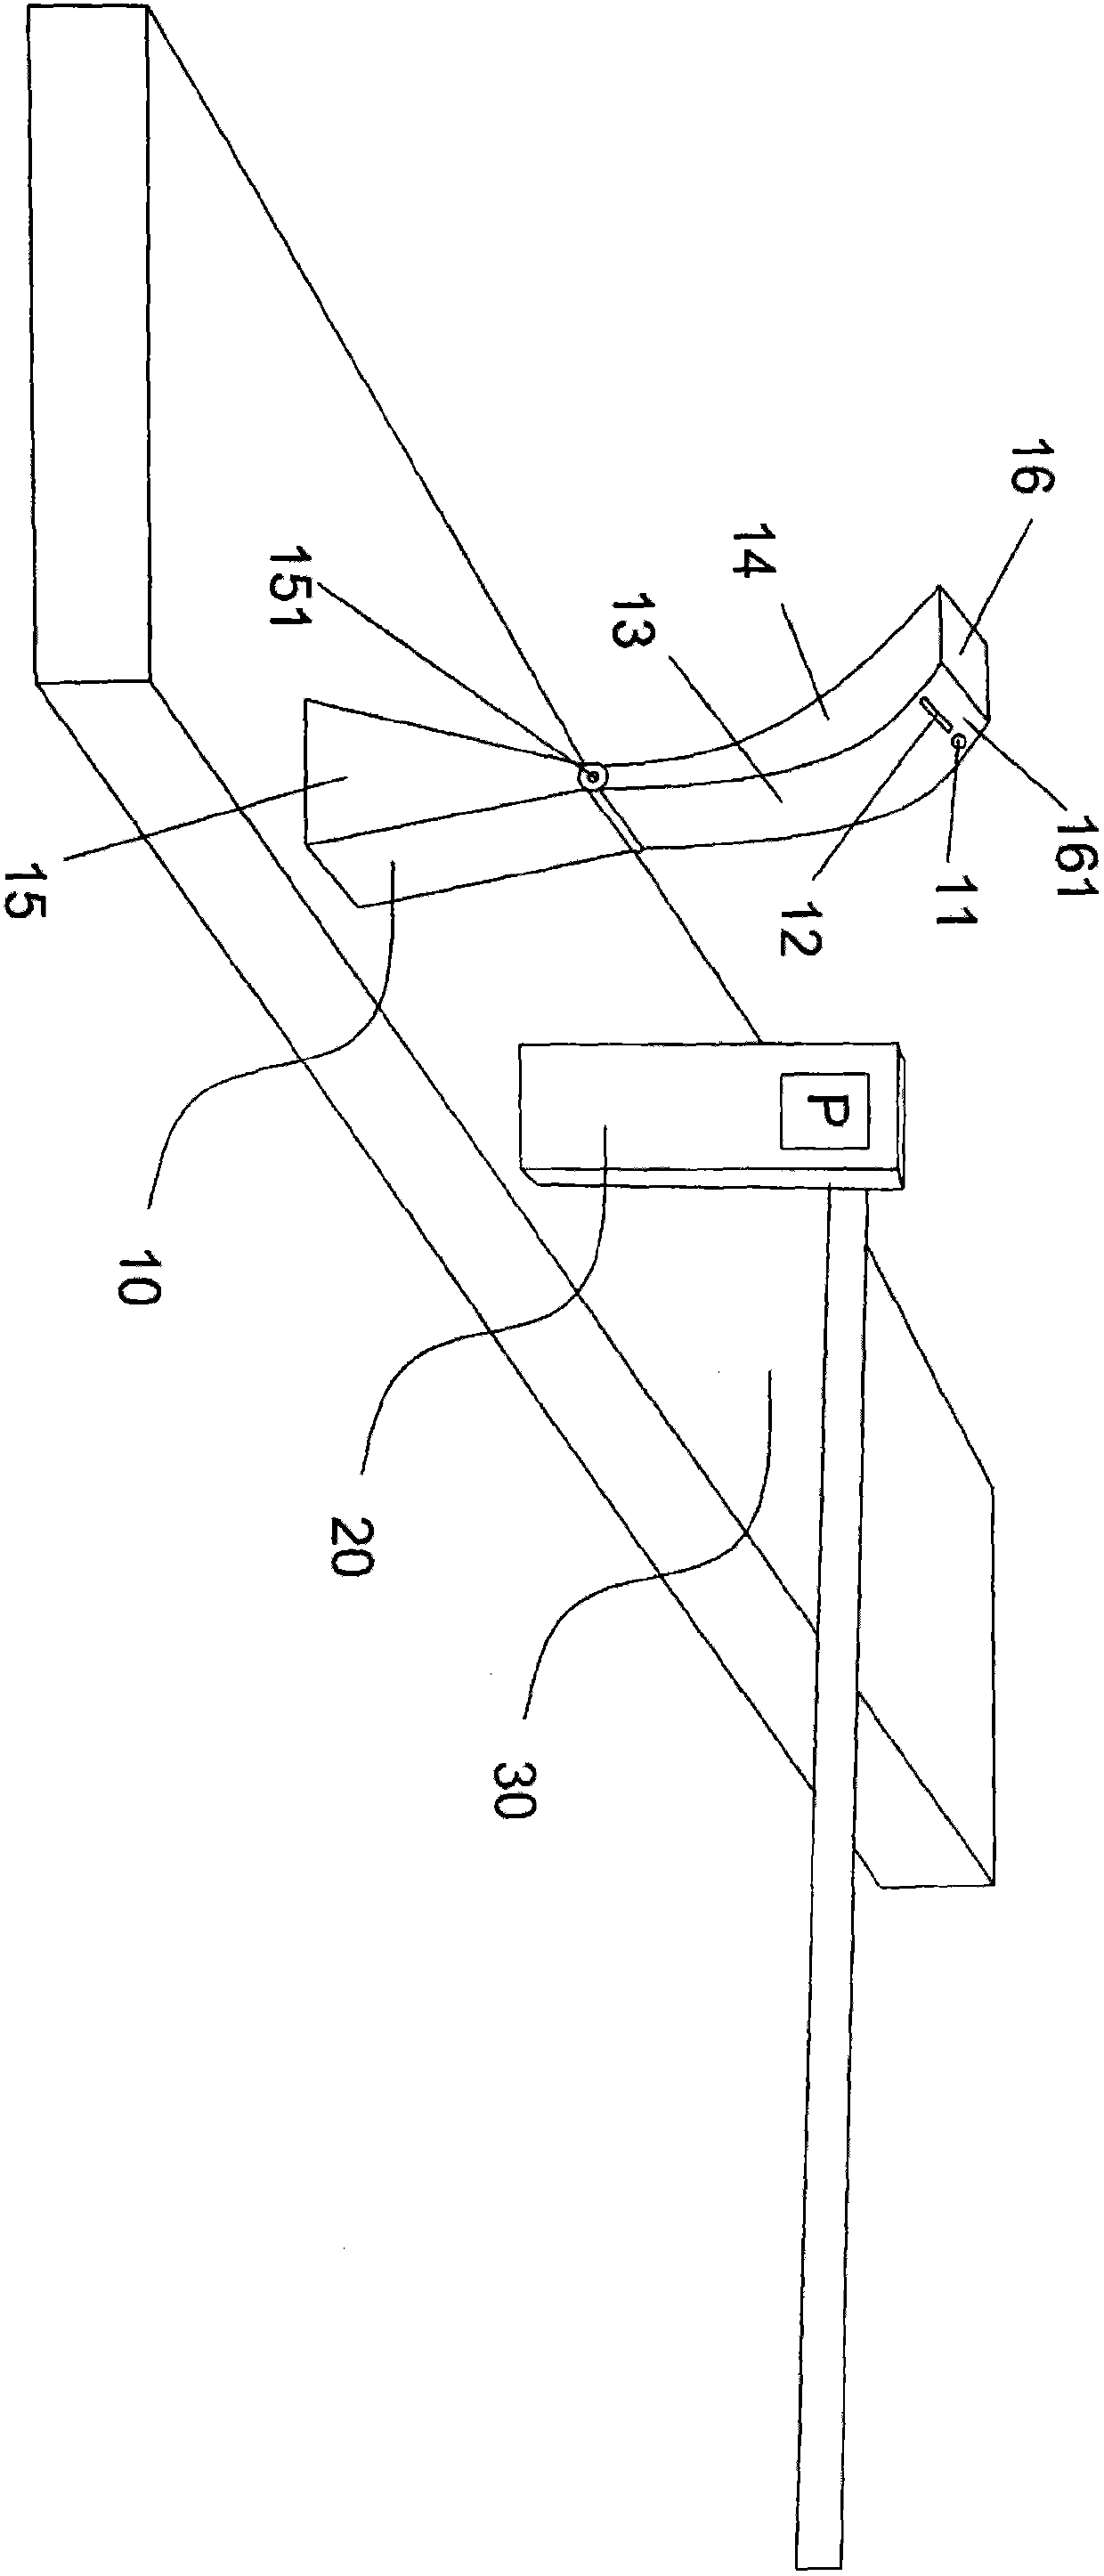 Toll collecting device capable of automatically approaching automobile